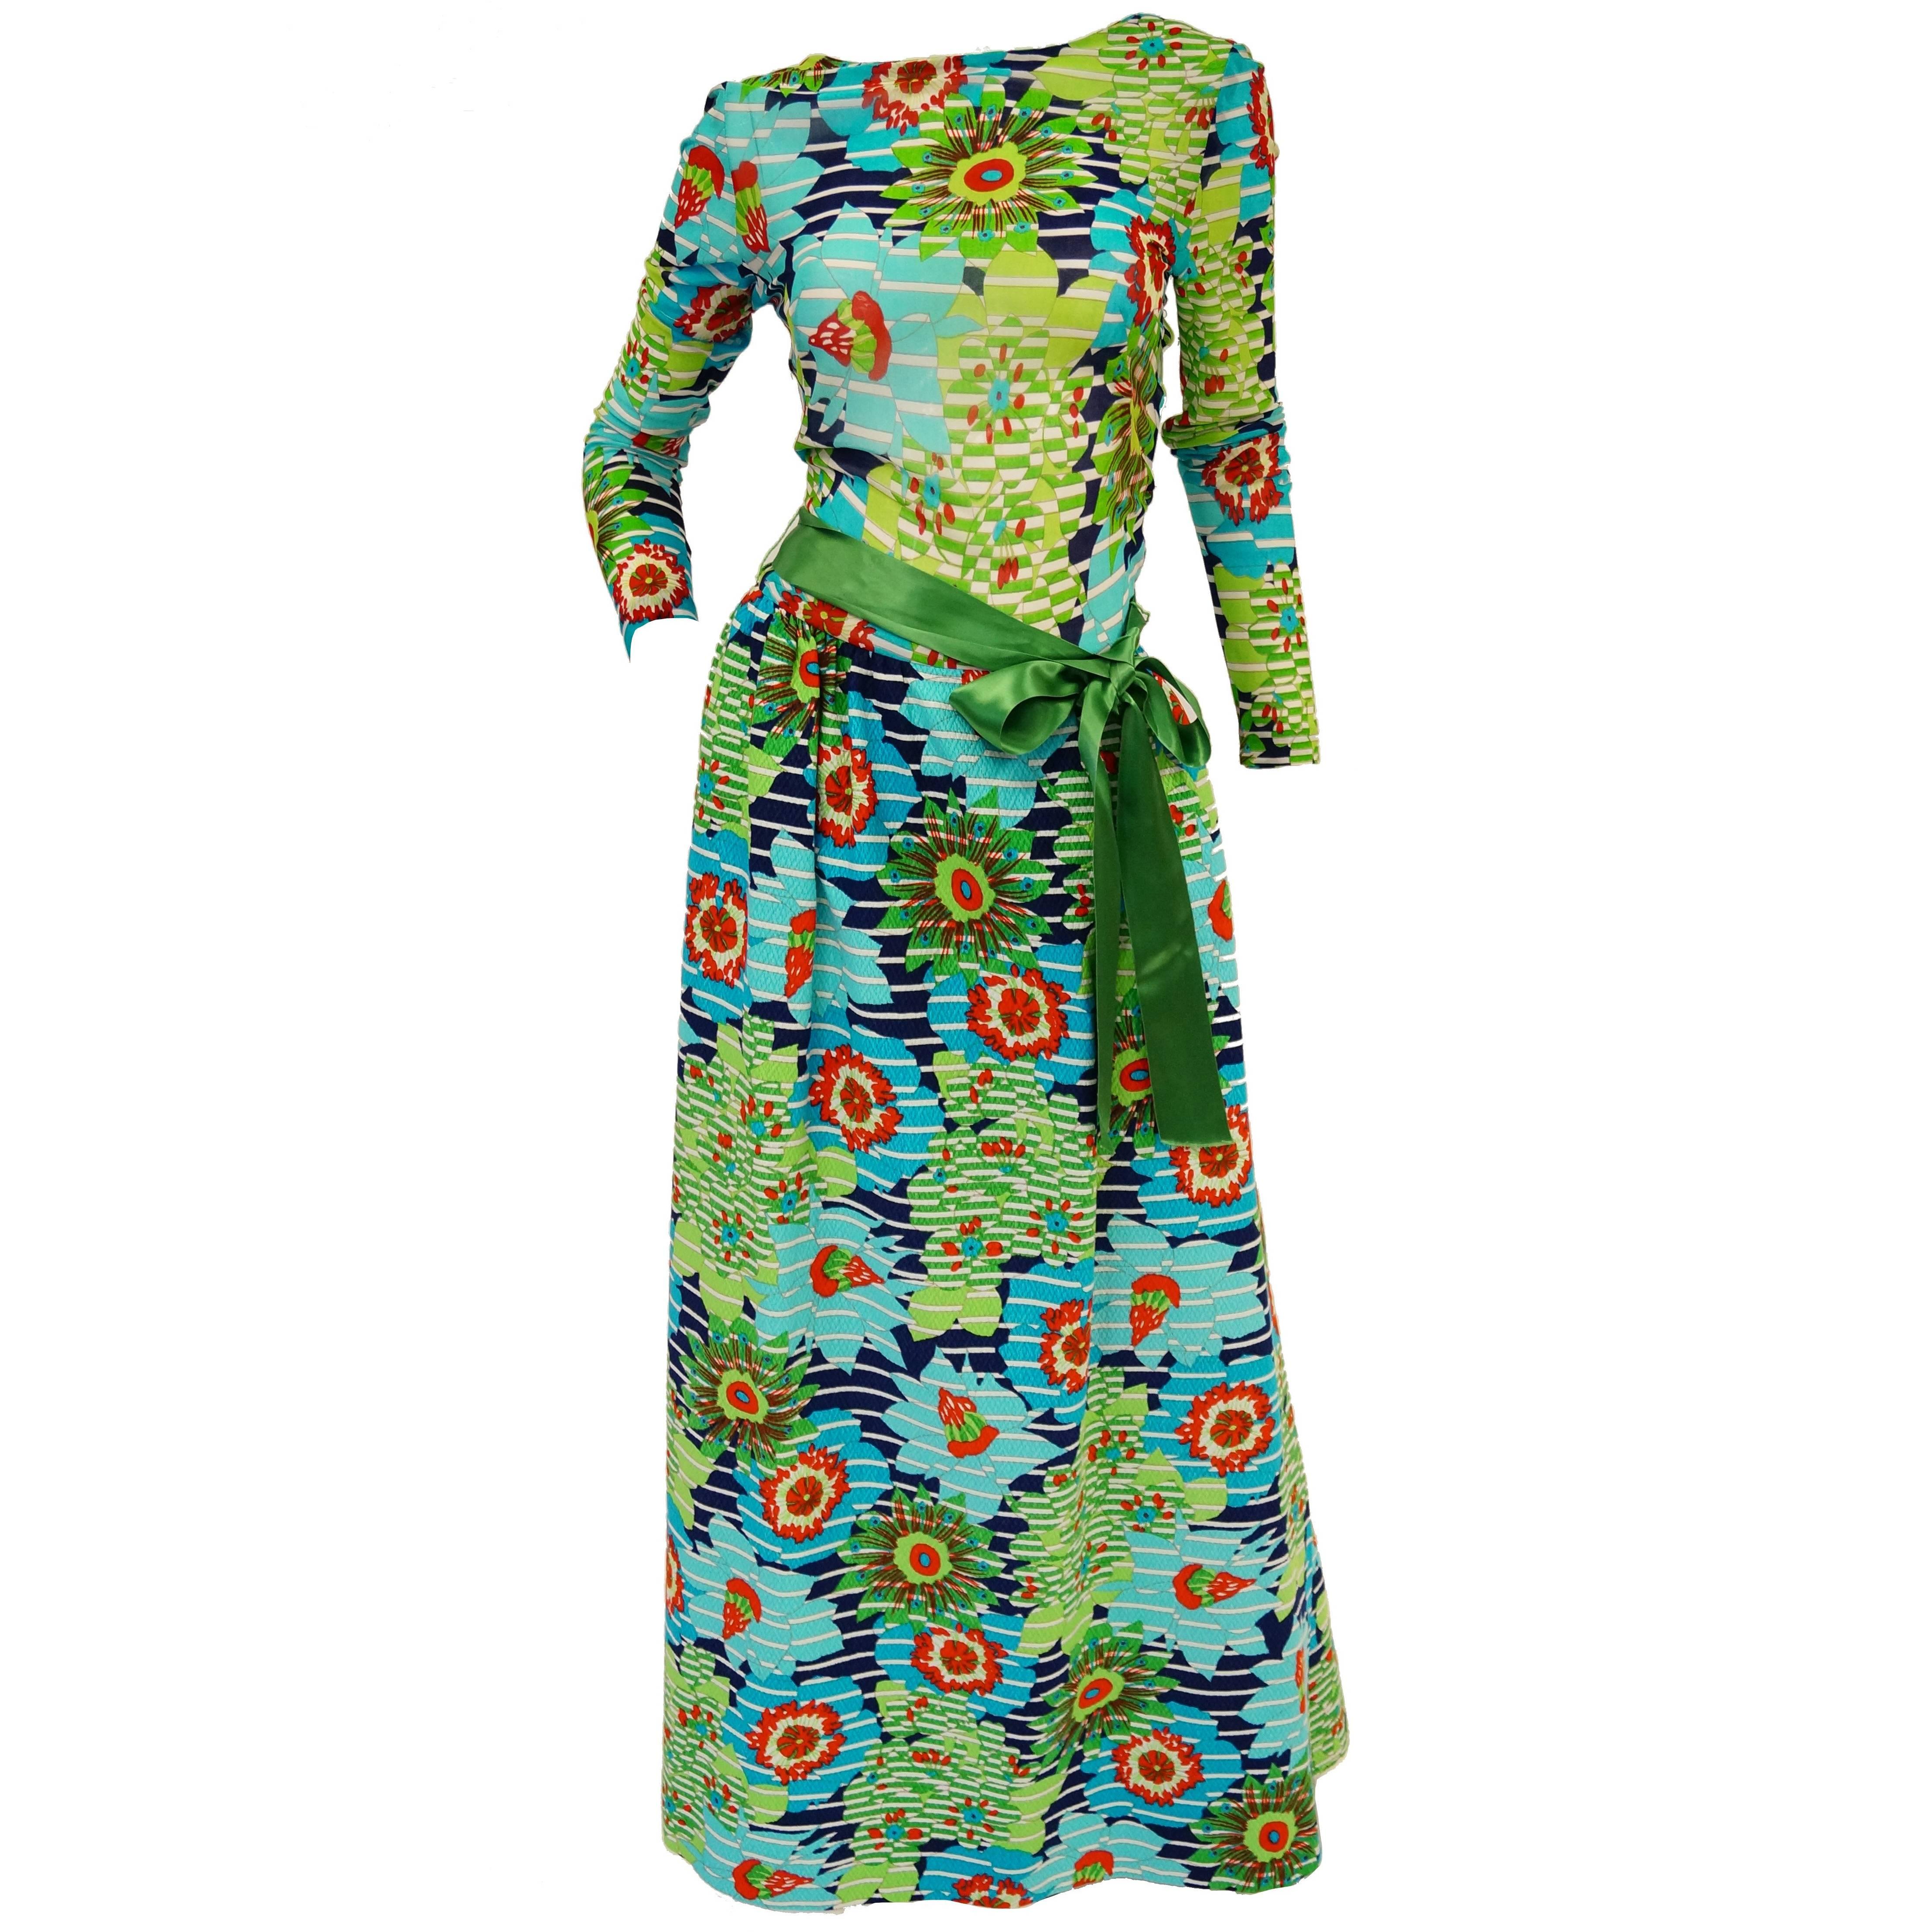  Lanvin Green and Blue Floral Dress with Sheer Bodice and Scoop Back, 1970s 